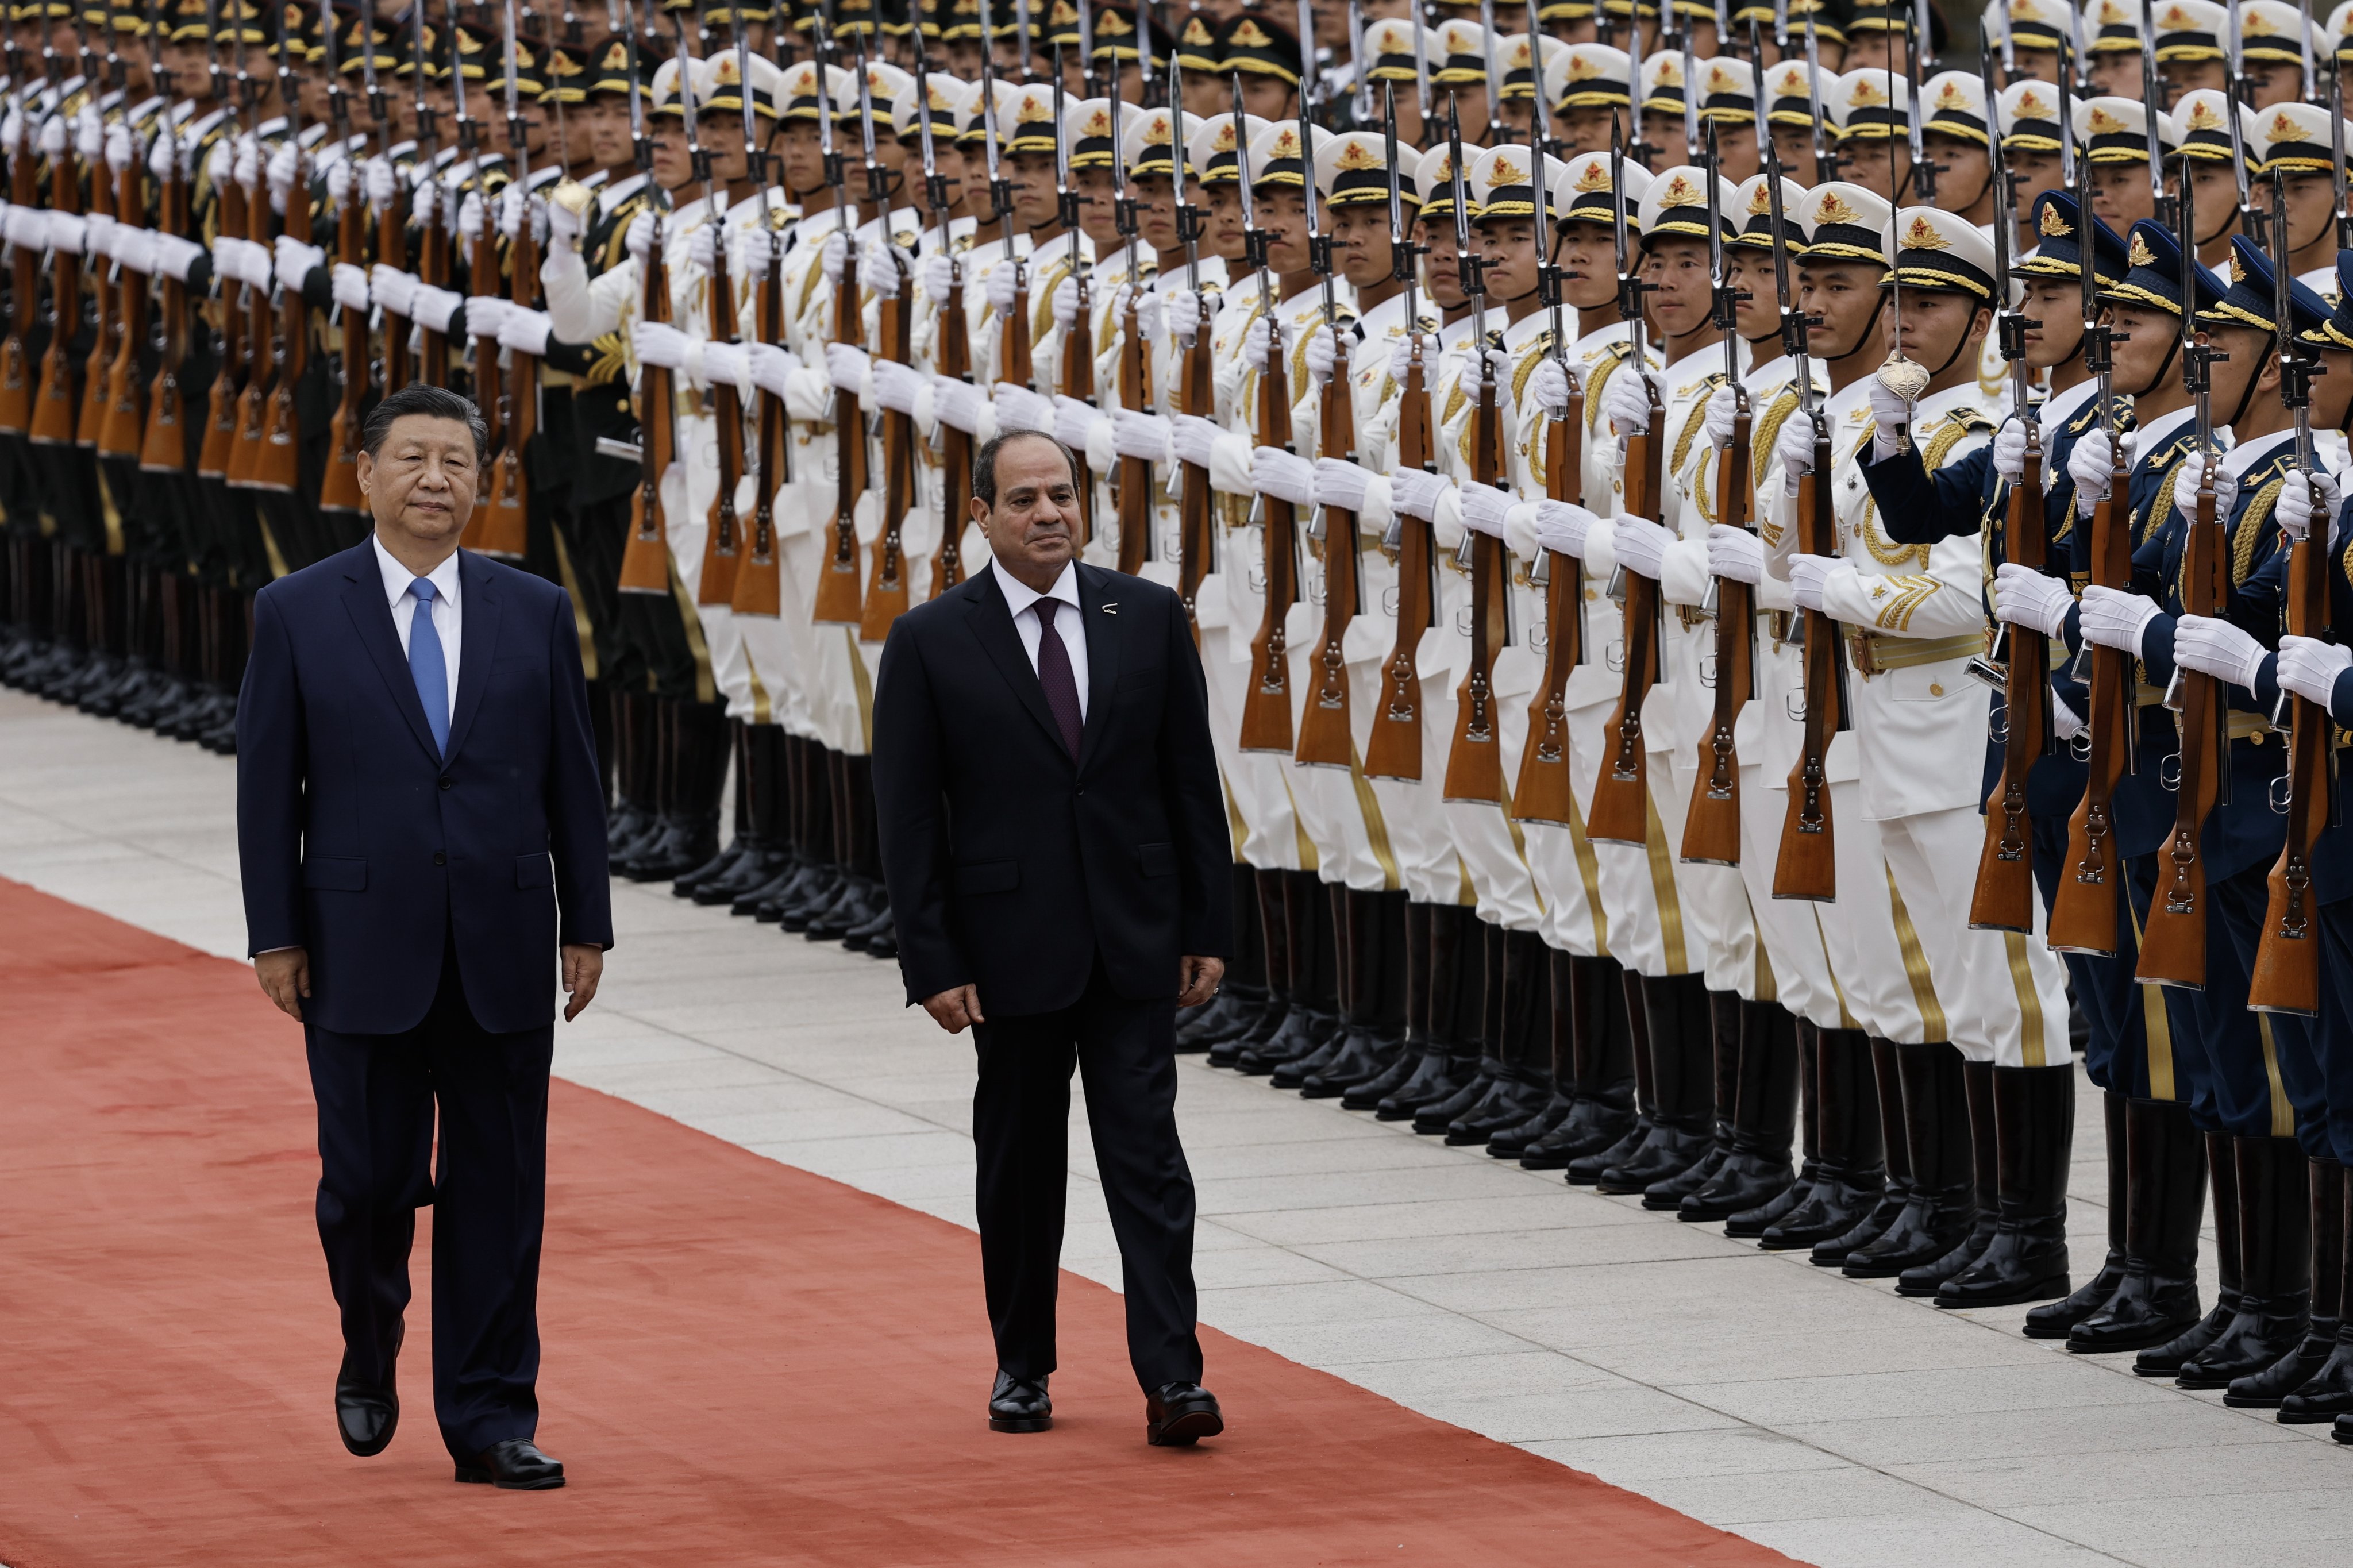 Chinese President Xi Jinping and his Egyptian counterpart Abdel Fattah el-Sisi review an honour guard at the Great Hall of the People, in Beijing on Wednesday. Photo: EPA-EFE 